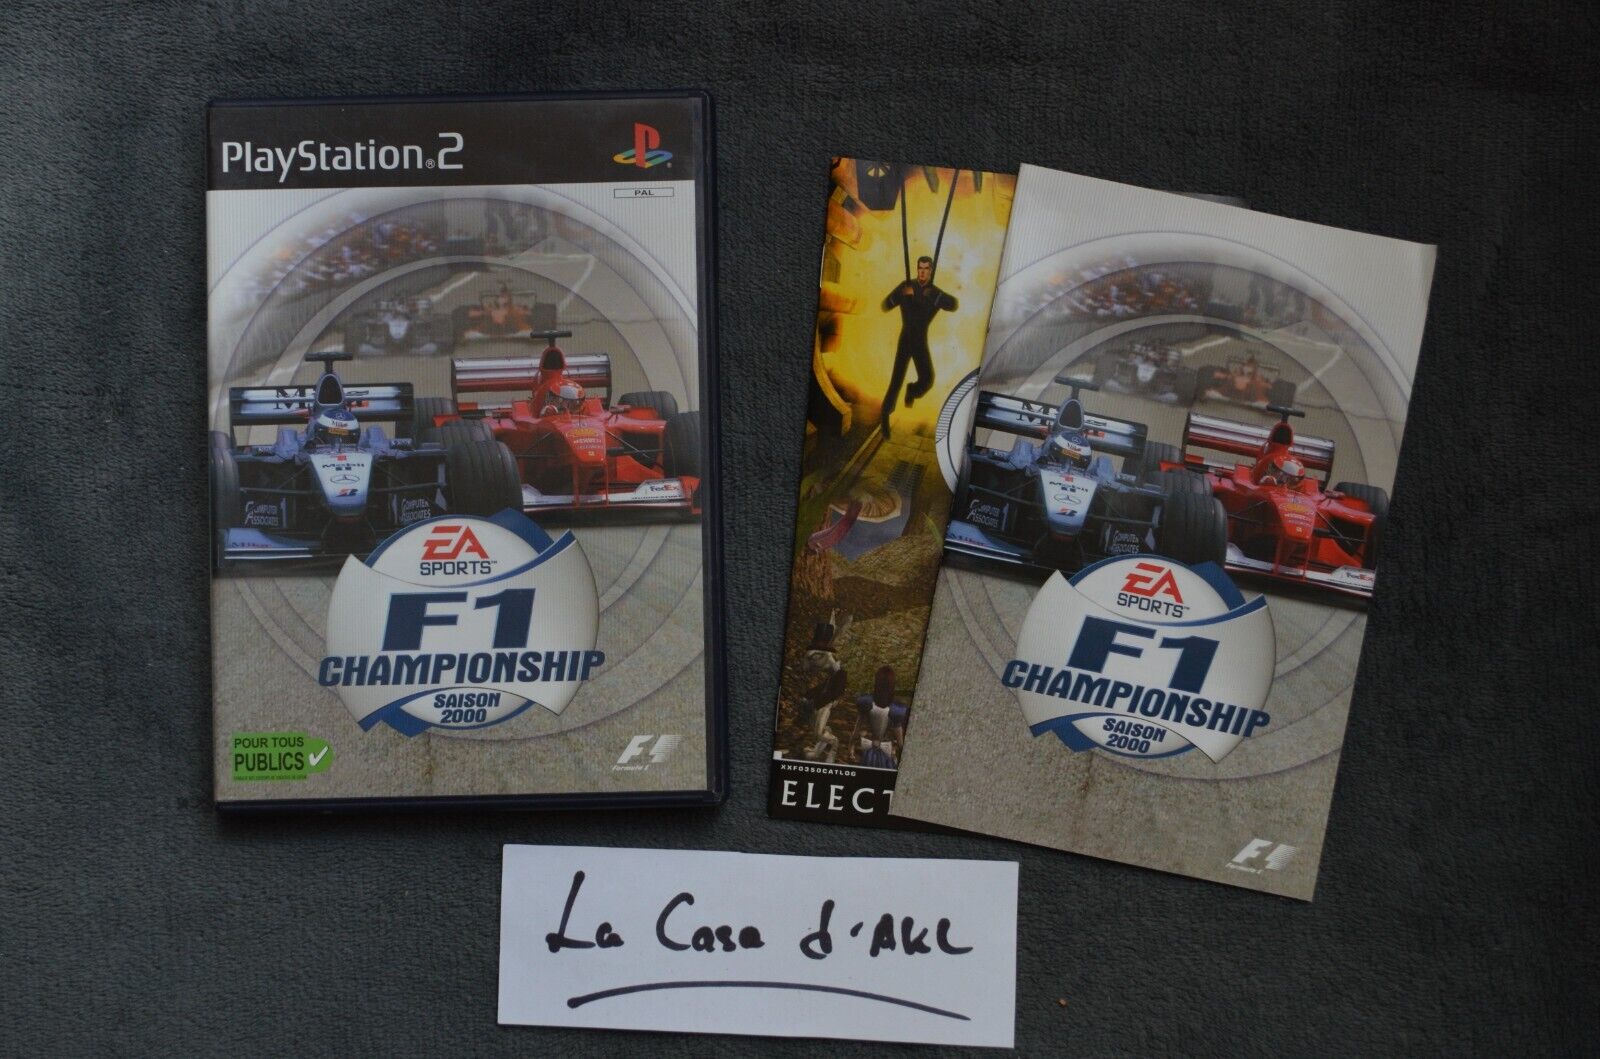 F1 Championship Saison 2000 Formula one complet Playstation 2 - PS2 FR TBE